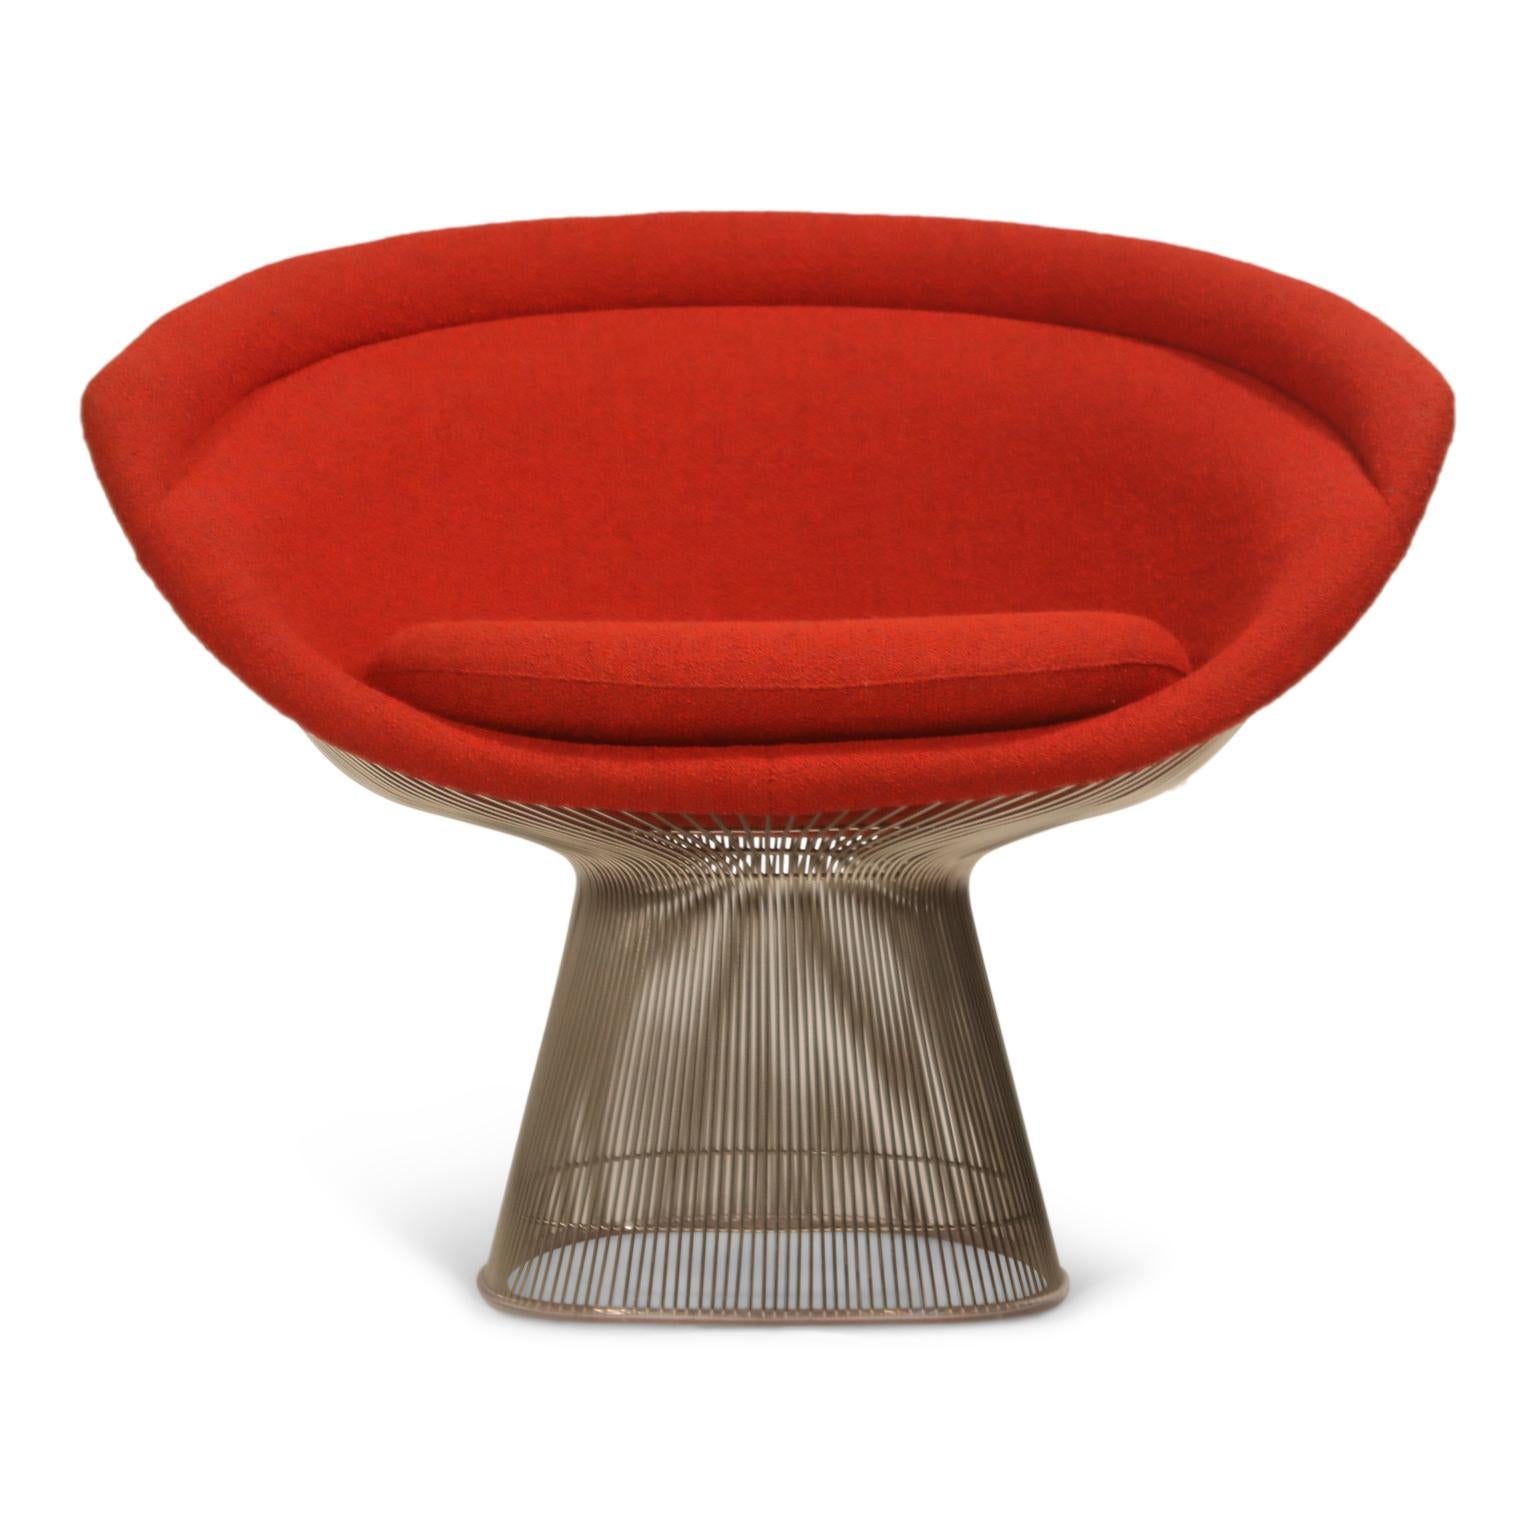 This near-mint condition set of four (4) Warren Platner for Knoll lounge chairs (Model 1715L) are upholstered in Knoll's gorgeous 'Classic Boucle' in 'Cayenne' color-way which is a beautiful deep red color, over nickel plated polished steel frames.